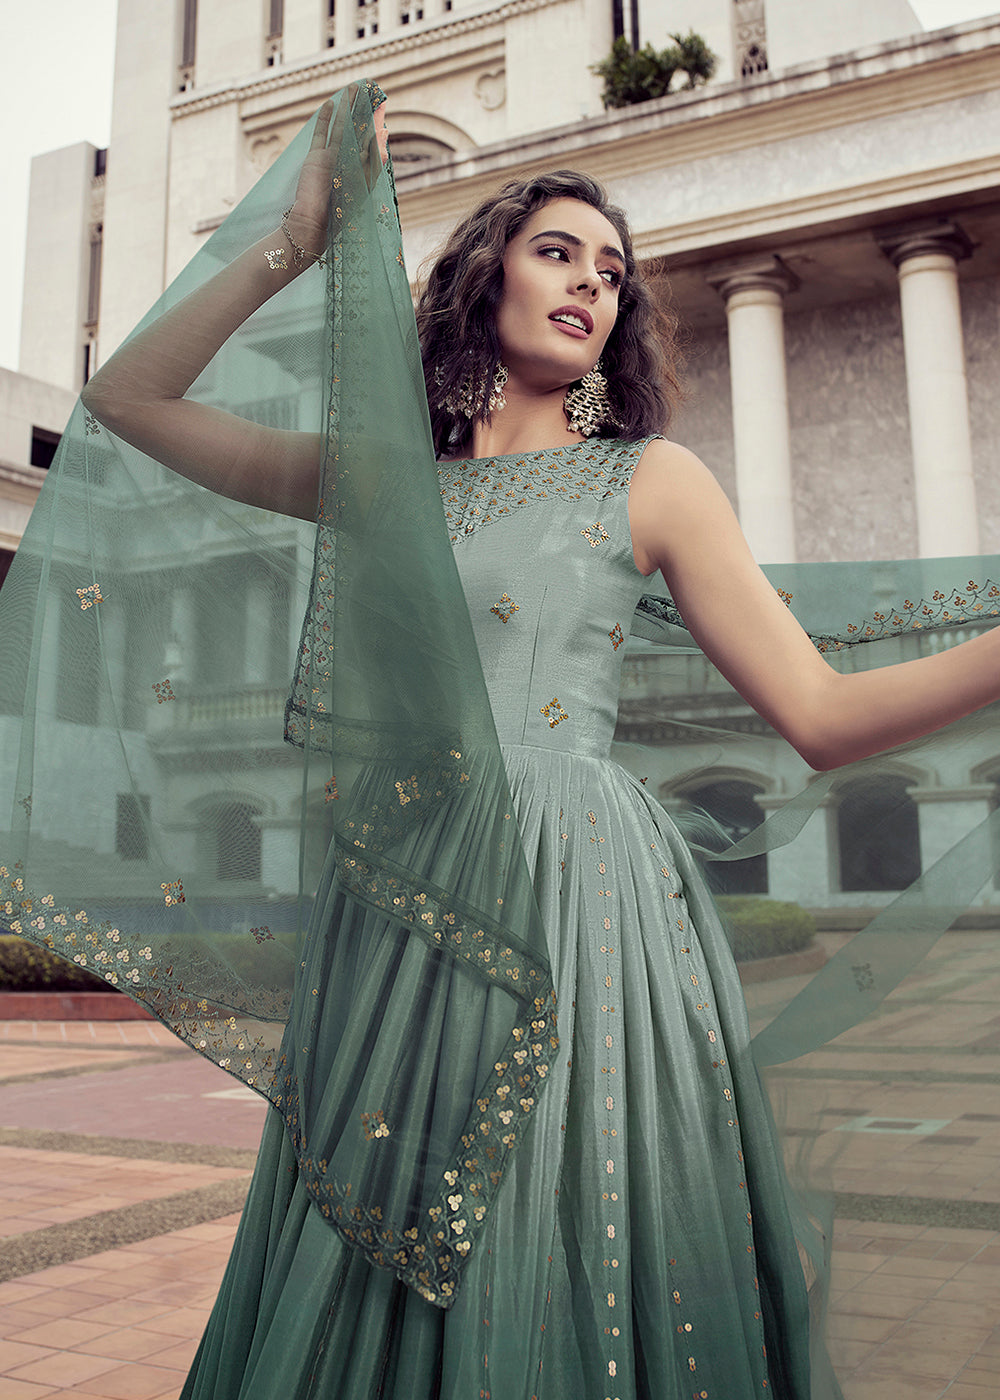 Buy Now Fabulous Ombre Green Chinon Reception Wear Gown Online in USA, UK, Australia, New Zealand, Canada & Worldwide at Empress Clothing.